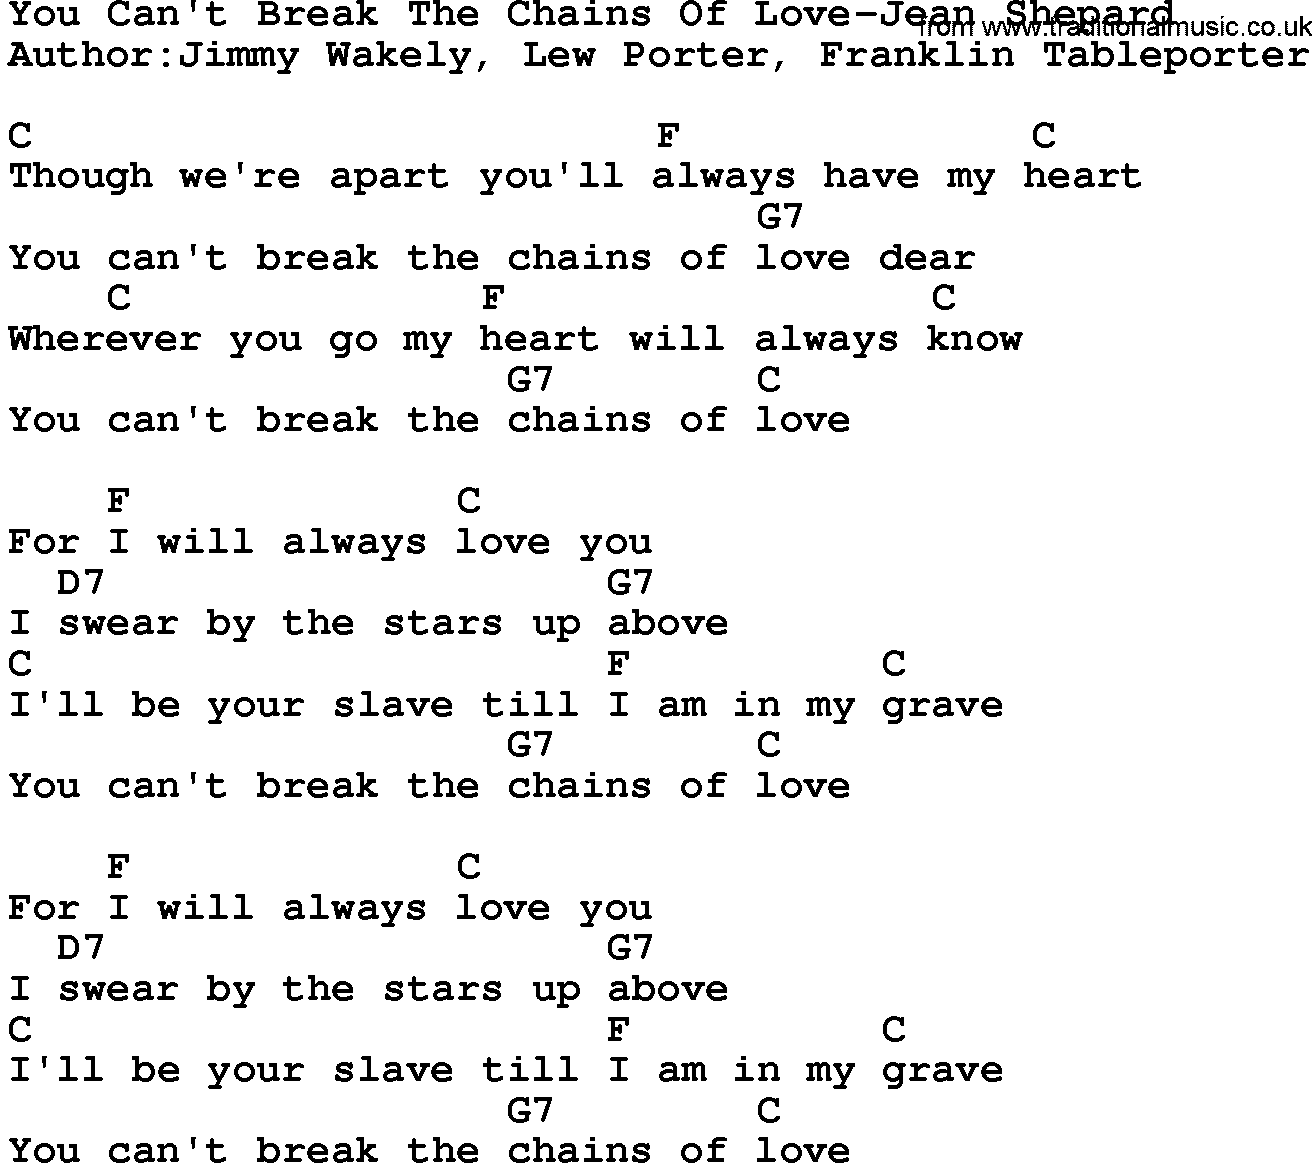 Country music song: You Can't Break The Chains Of Love-Jean Shepard lyrics and chords